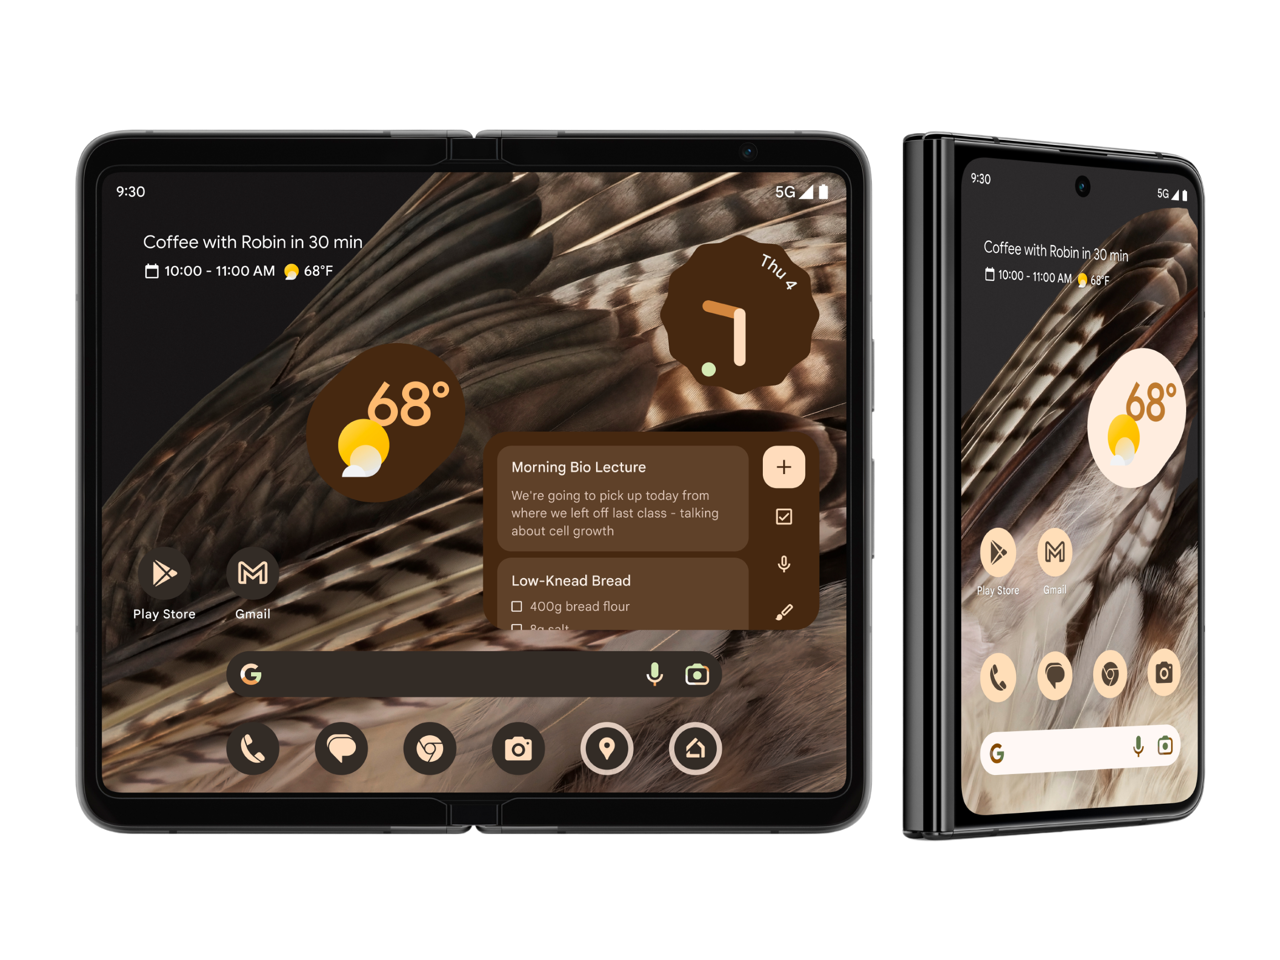 Android 14 DP2 readies new features perfect for Pixel Fold & Tablet